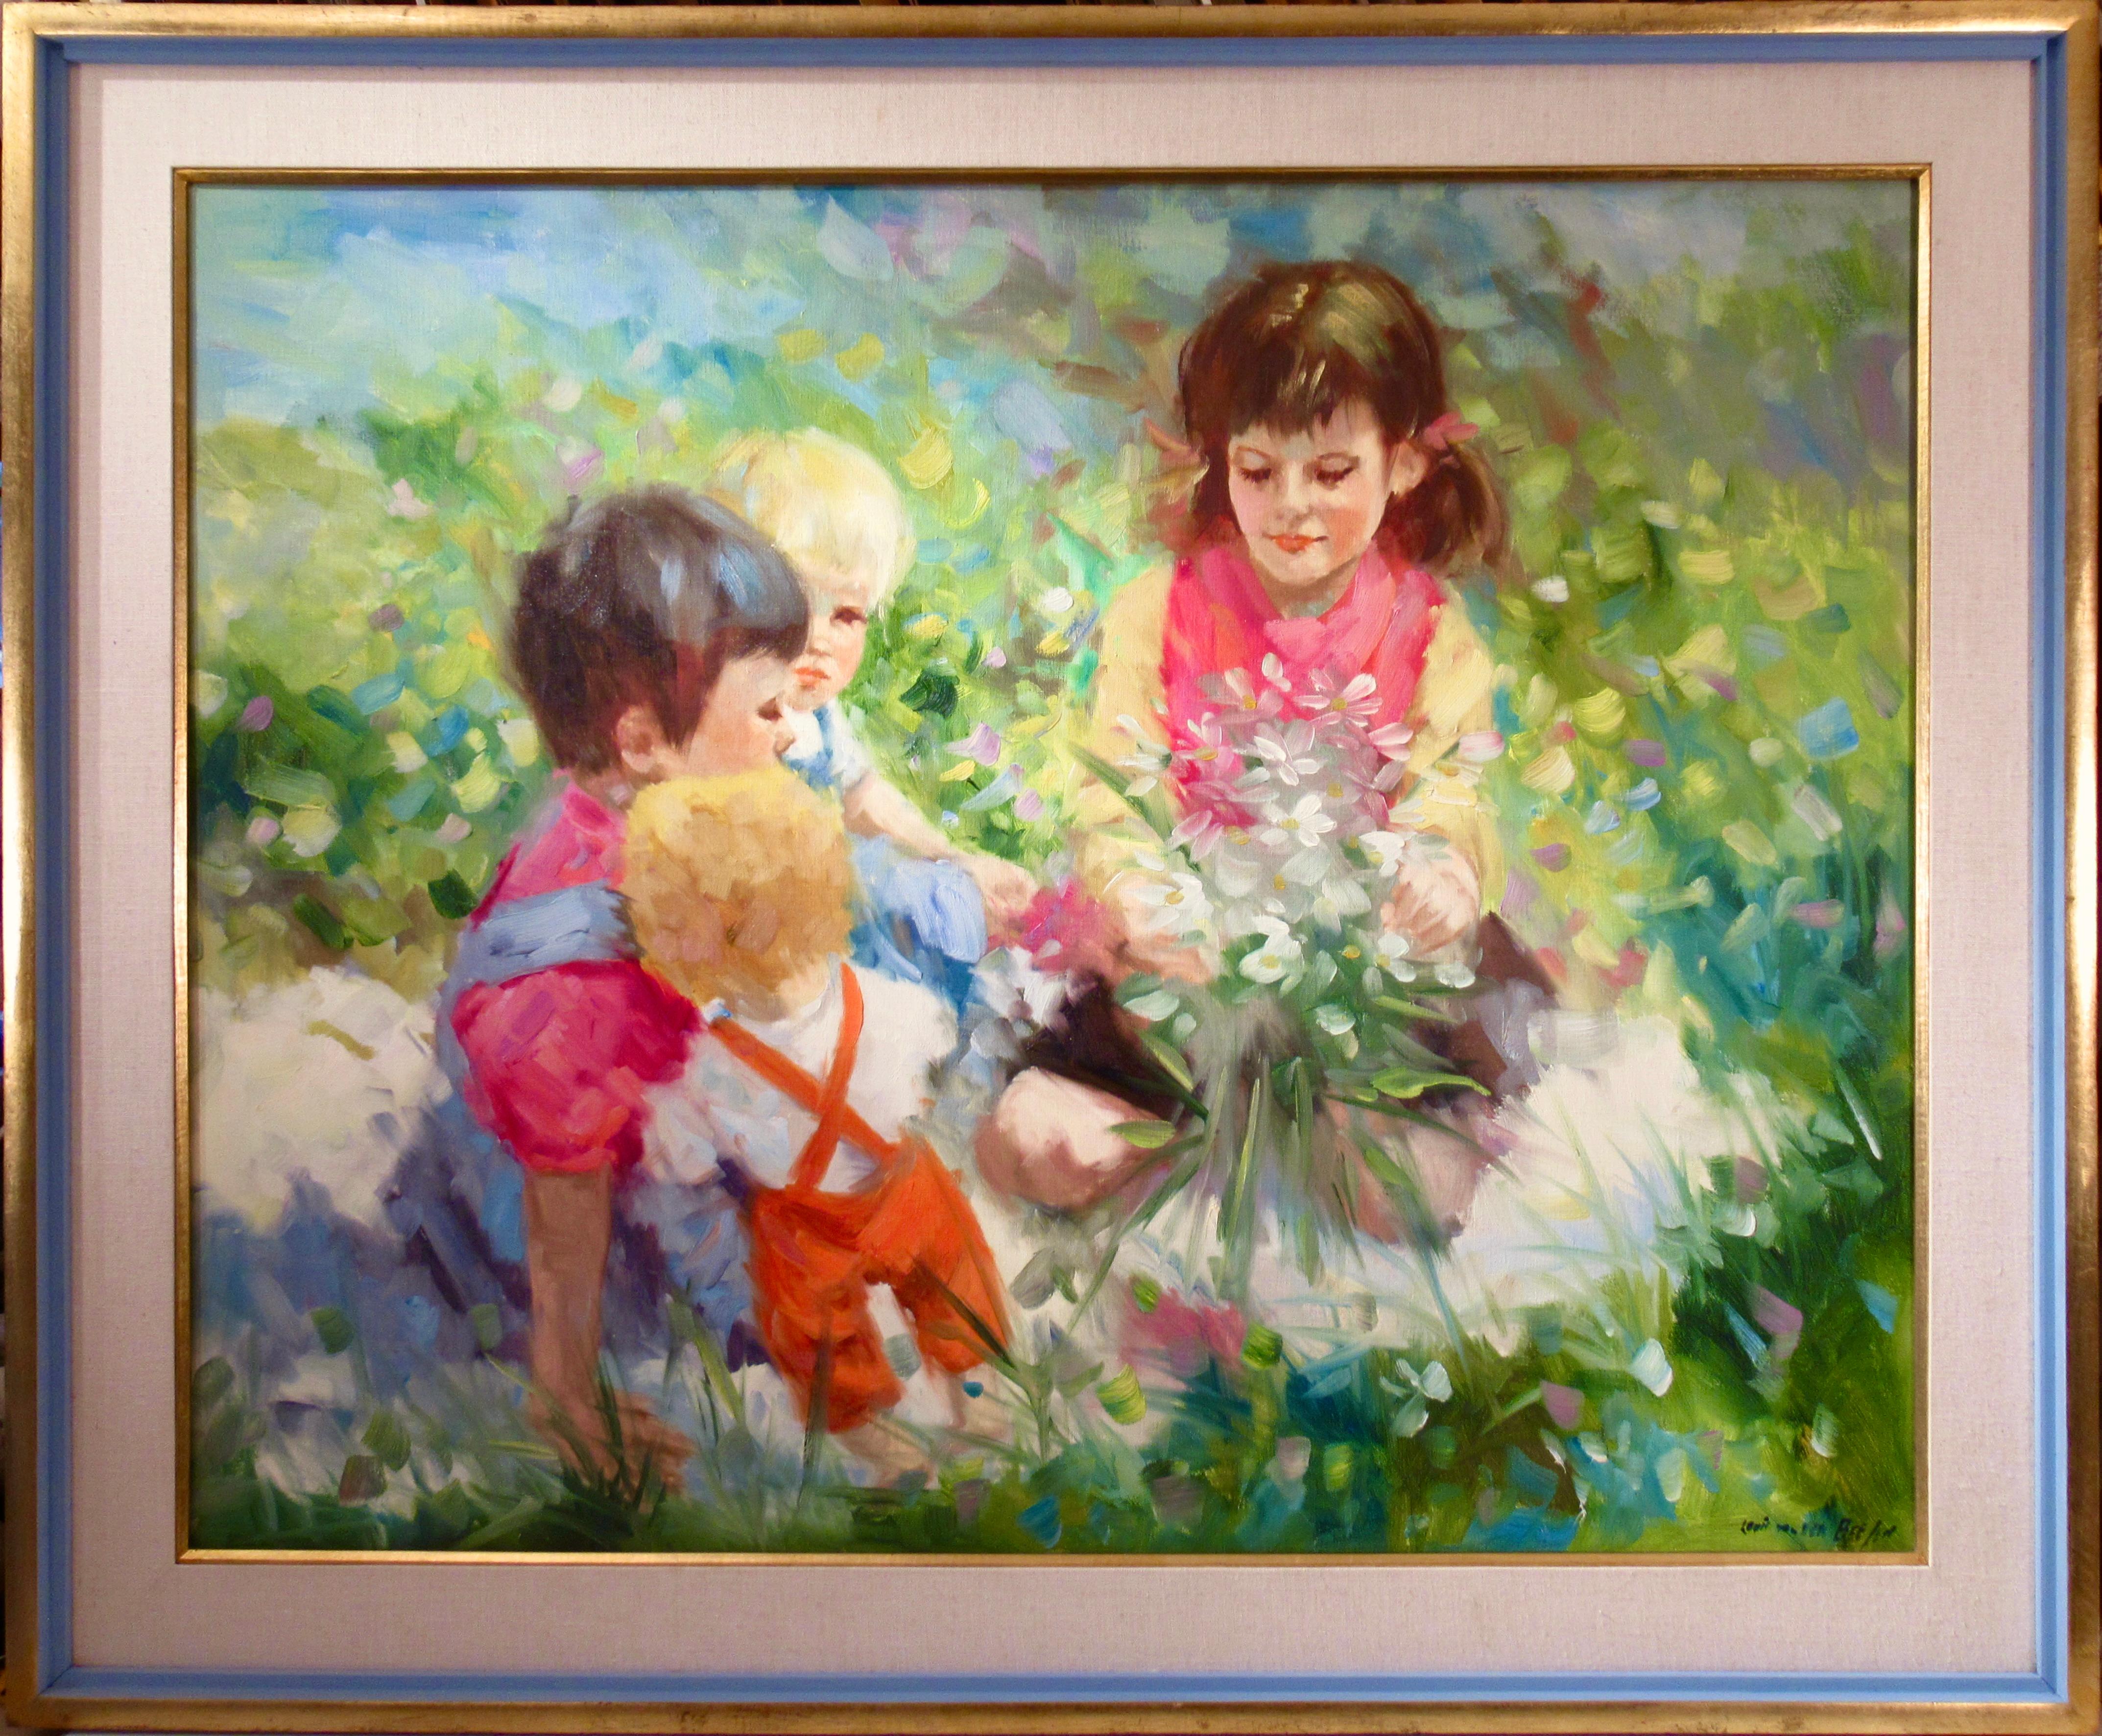 Louis Van Der Beesen Figurative Painting - "Children Playing in a Field" Large oil painting on canvas